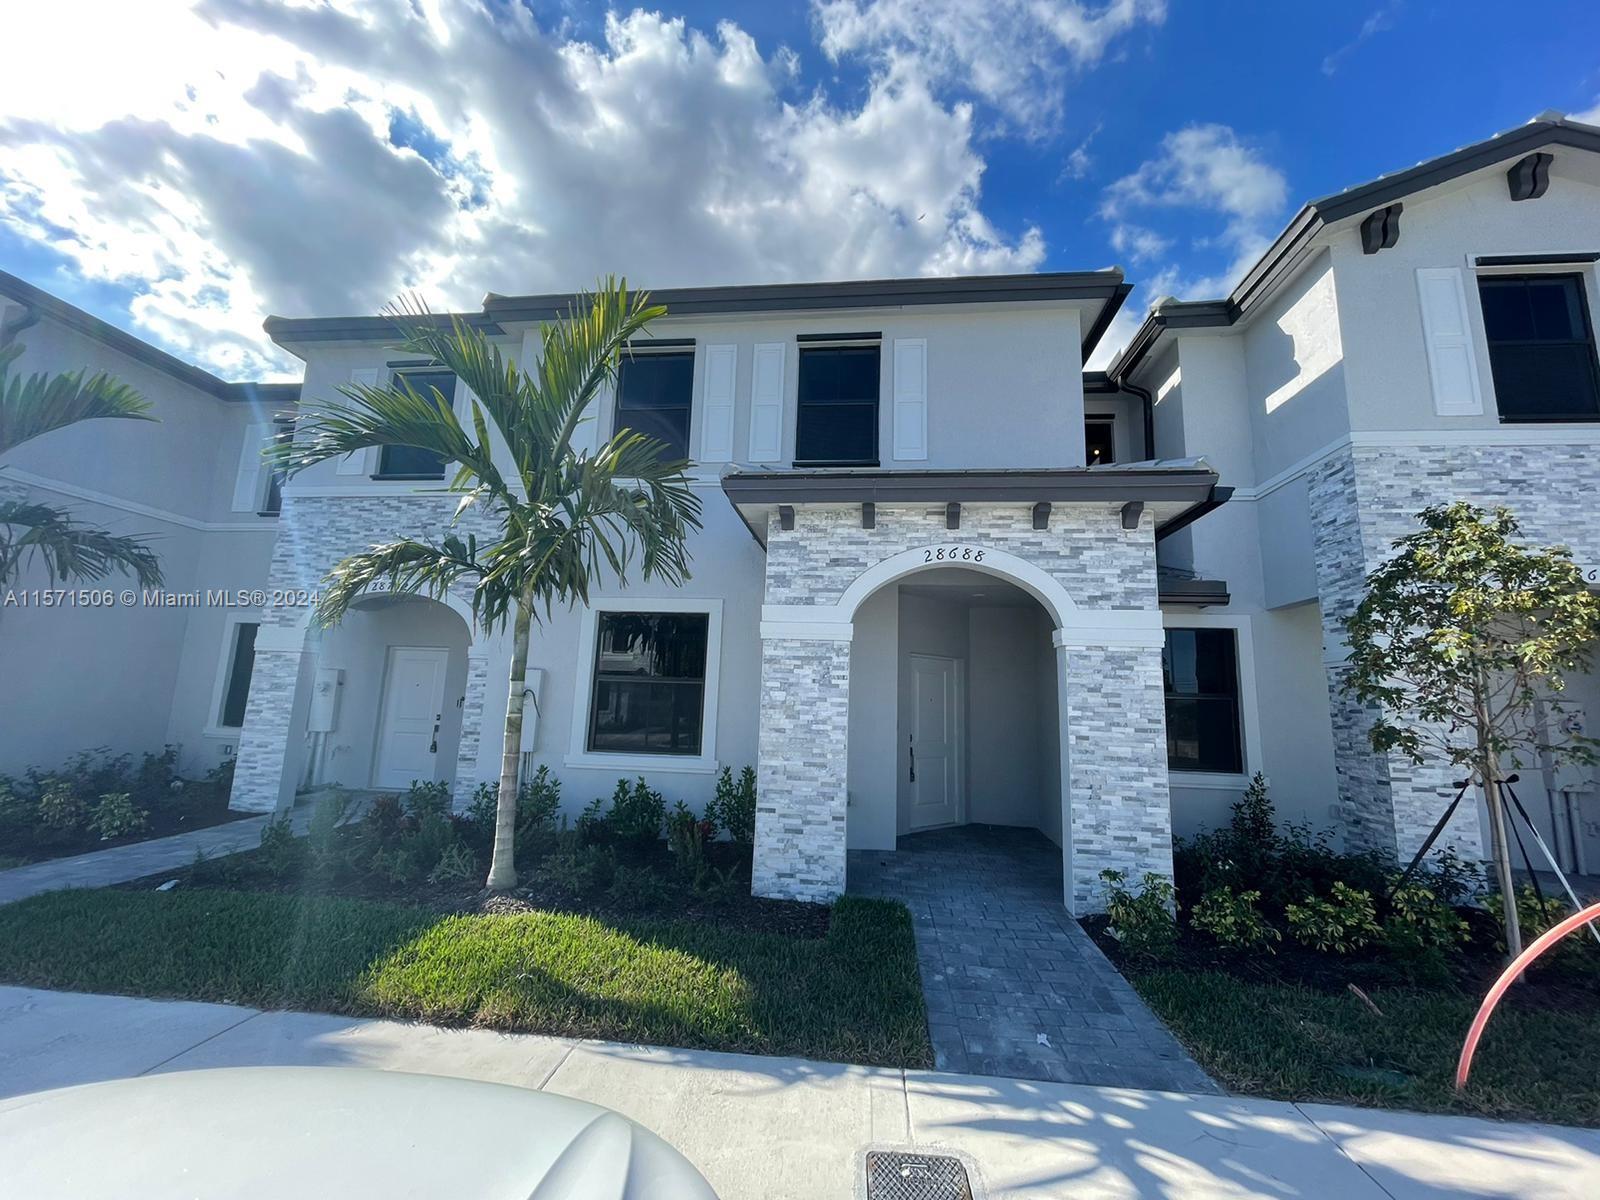 Beautifull brand new and spacious Villa with 3 bed + 2.5 bath located at the Pine Vista masterplan in Homestead, FL, FOR SALE. This property is close proximity to golf courses, shopping centers and even Everglades National Park. Brand-new appliances; Swimming Pool; Tot Lot and Clubhouse.